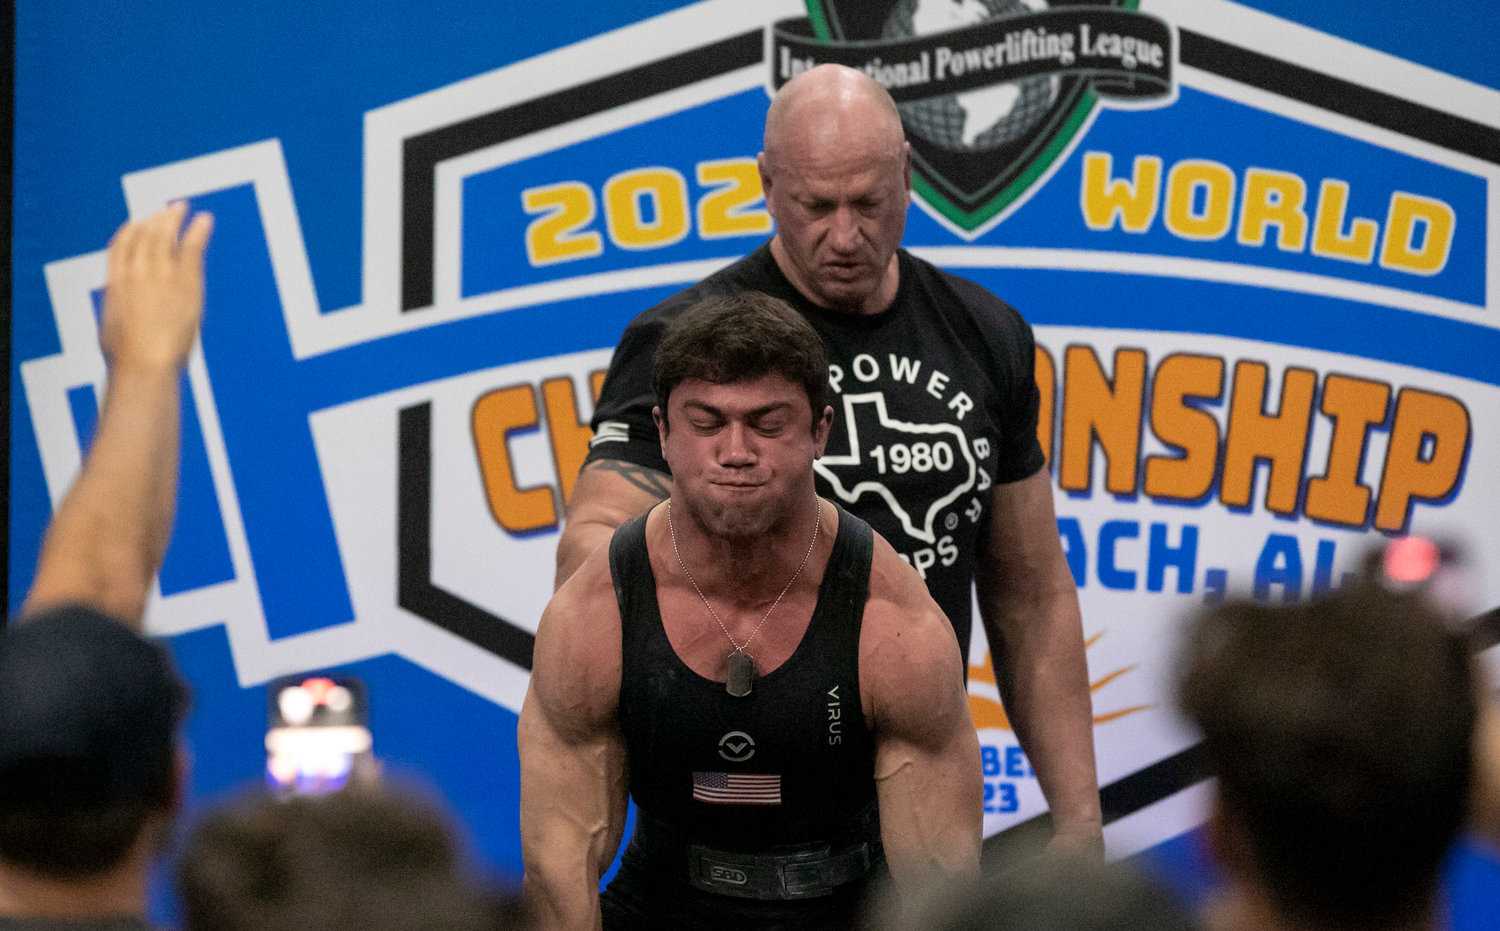 19-year-old Mcvay Stockwell pulls a world record-setting deadlift of 661.4 pounds (300 kg) on the first day of competition in the IPL’s World Championship meet at the Orange Beach Event Center Oct. 20. Stockwell represented Team USA as the 75kg open junior world champion.